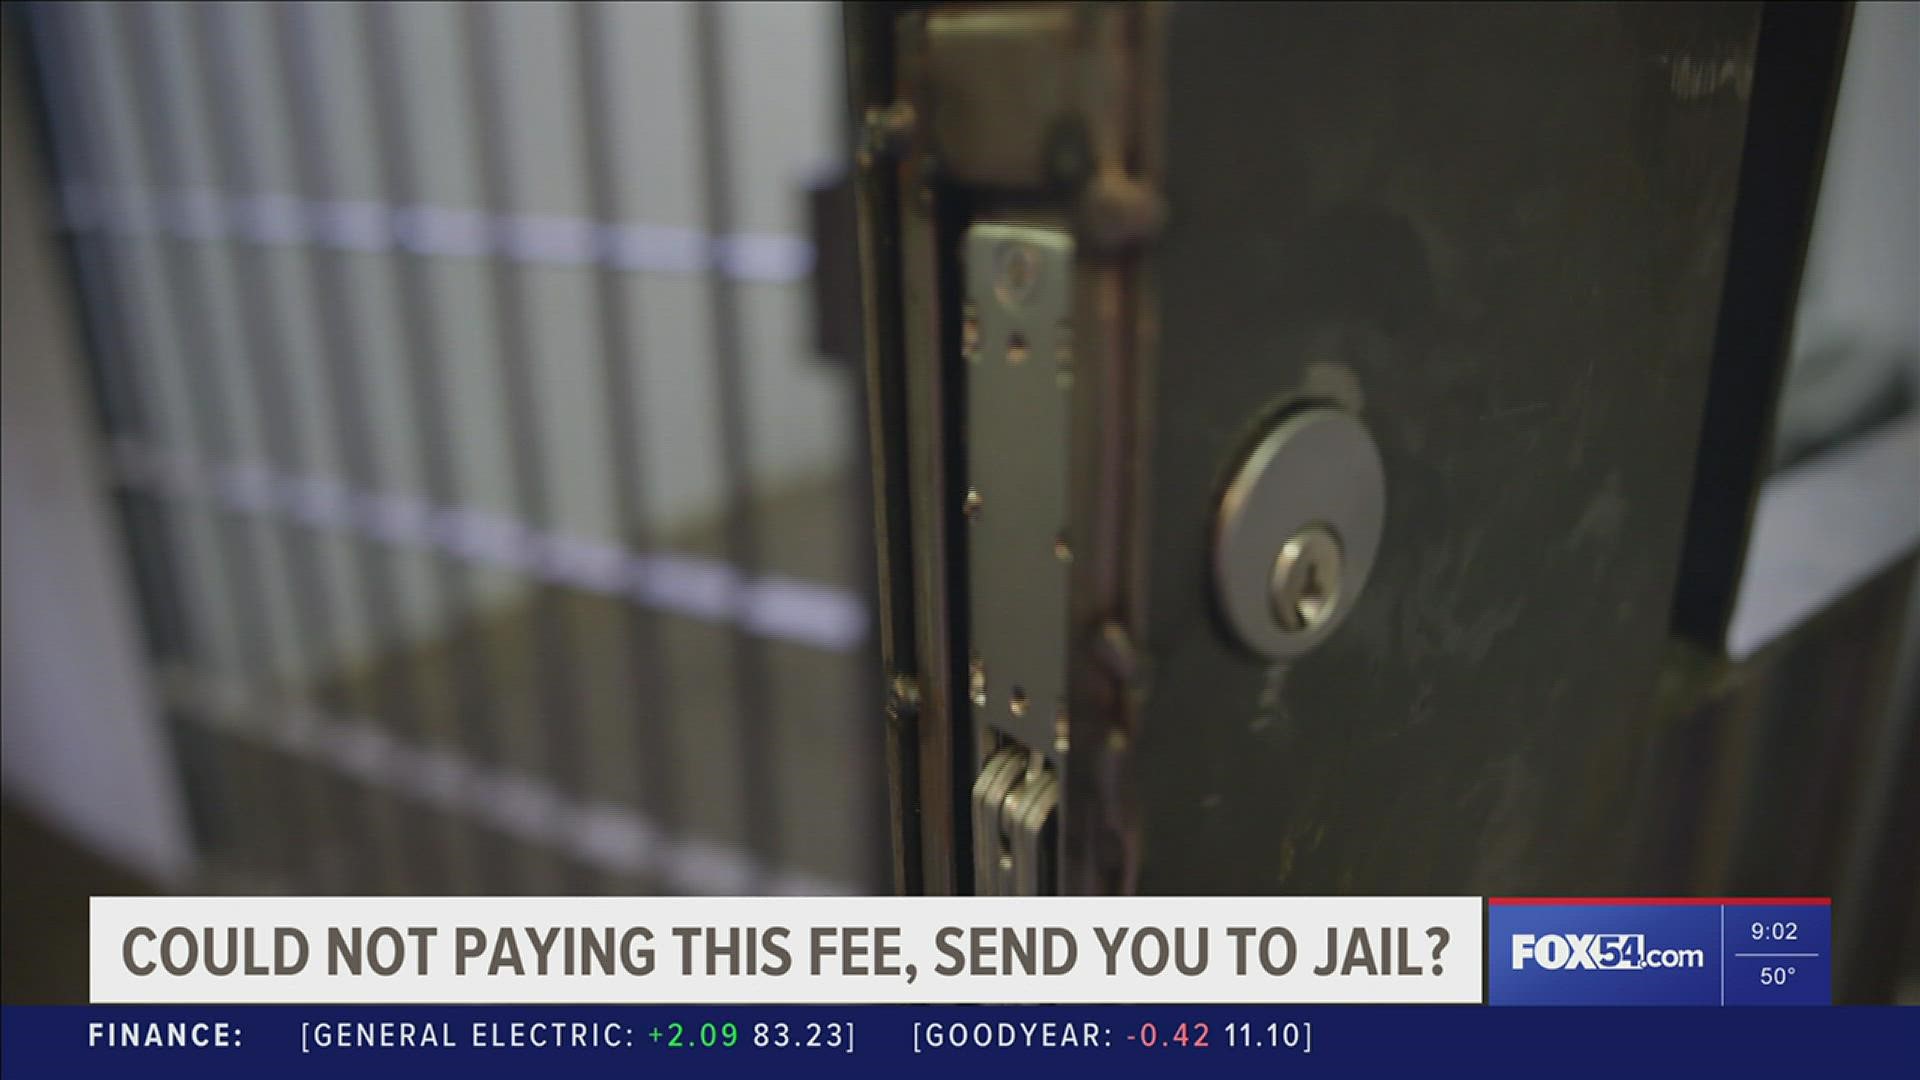 Supervision fee: Will not paying it, land you back in jail?